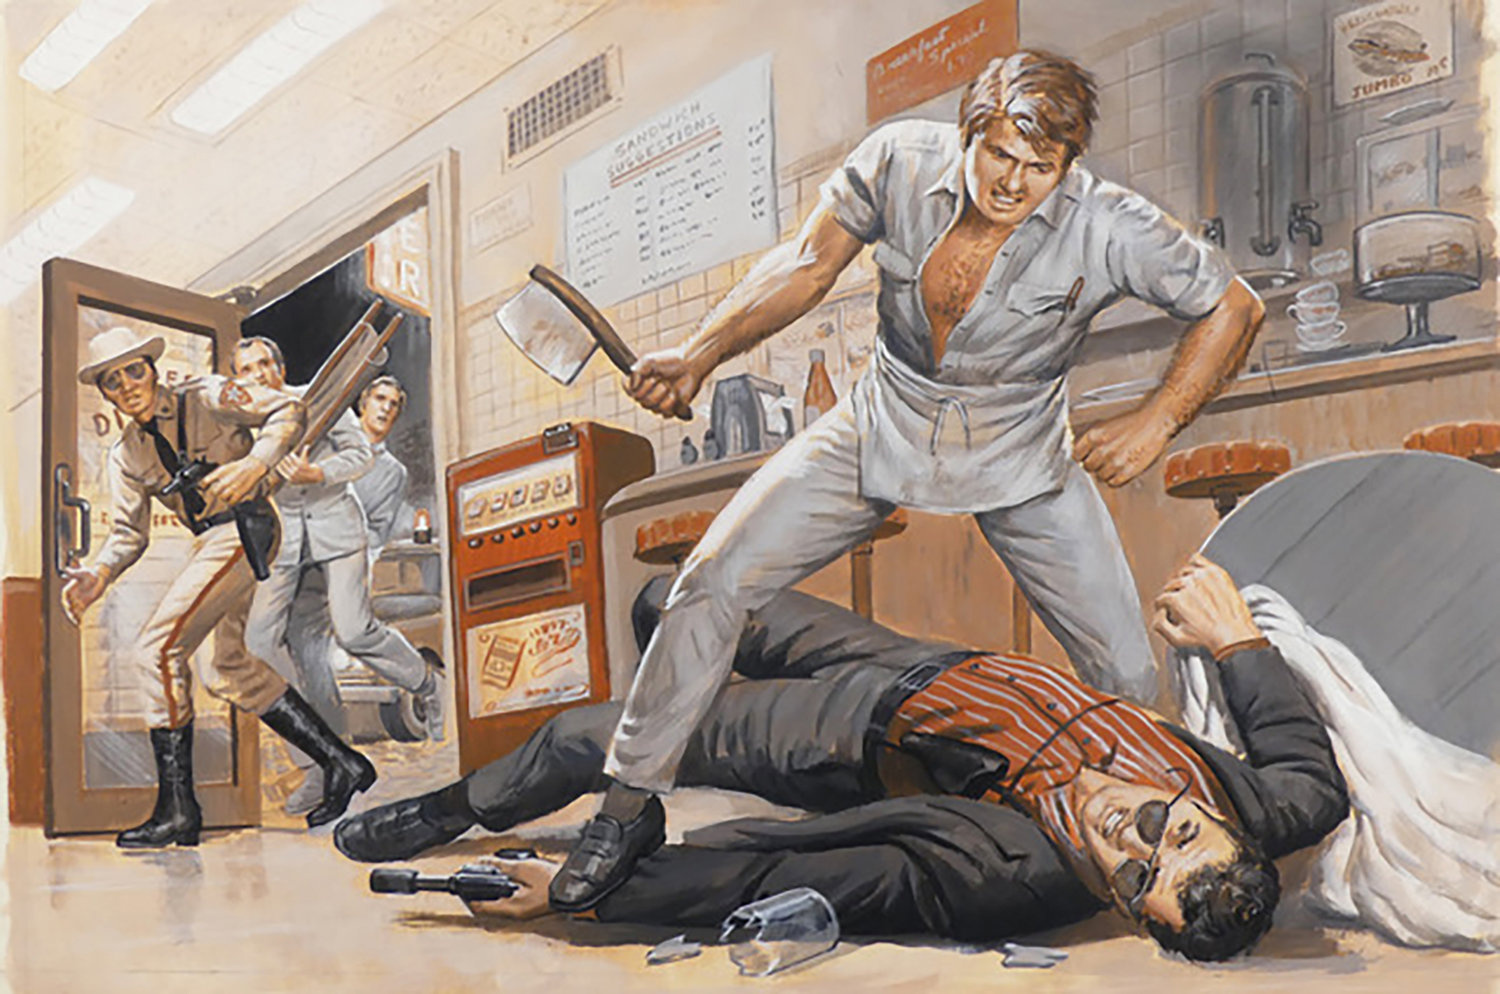 Much of pulp artist Samson Pollen’s work was published in the men’s action magazines of the mid-to-late 20th century. This piece, titled ‘Contract Killer on Cemetery Hill’ appeared in Stag.